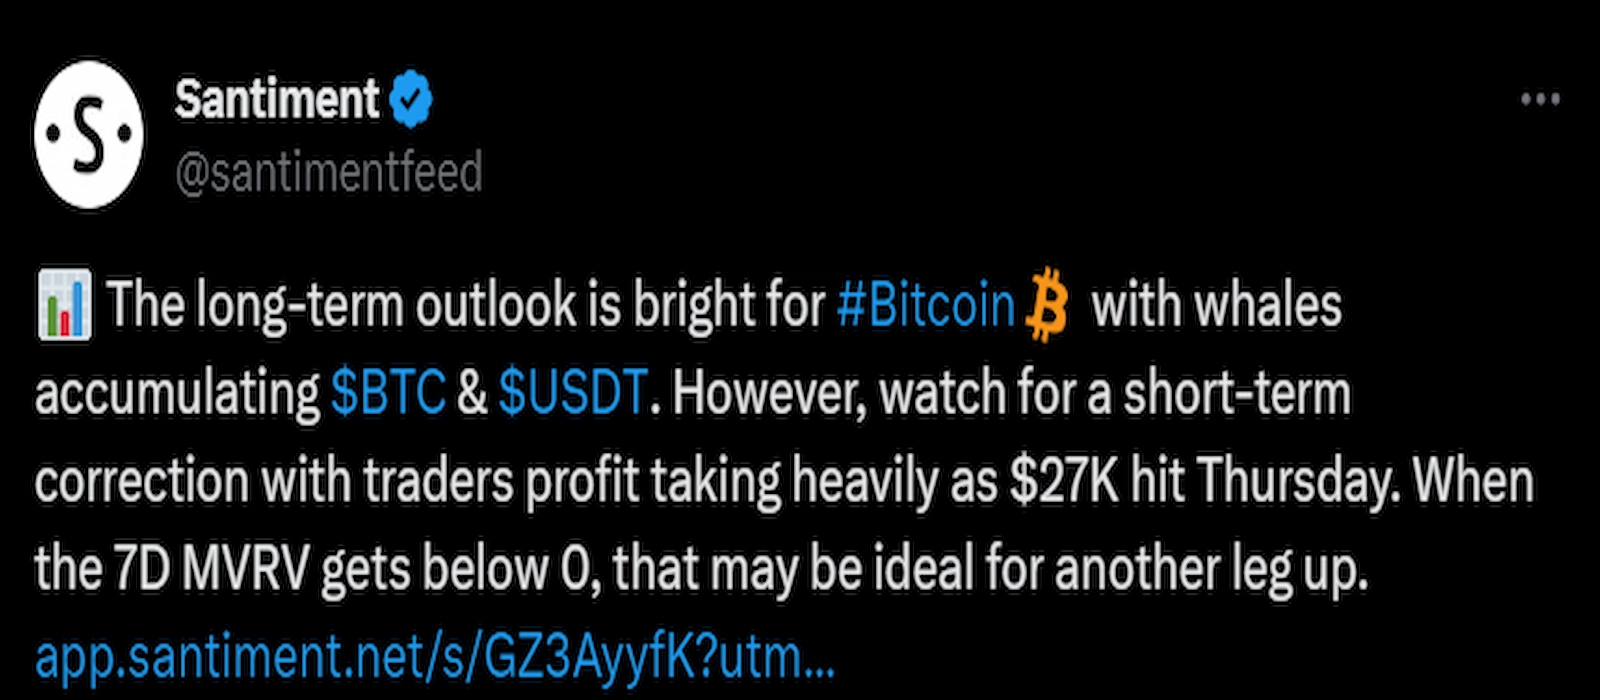 Santiment speculated a bright long-term prospect for Bitcoin price.